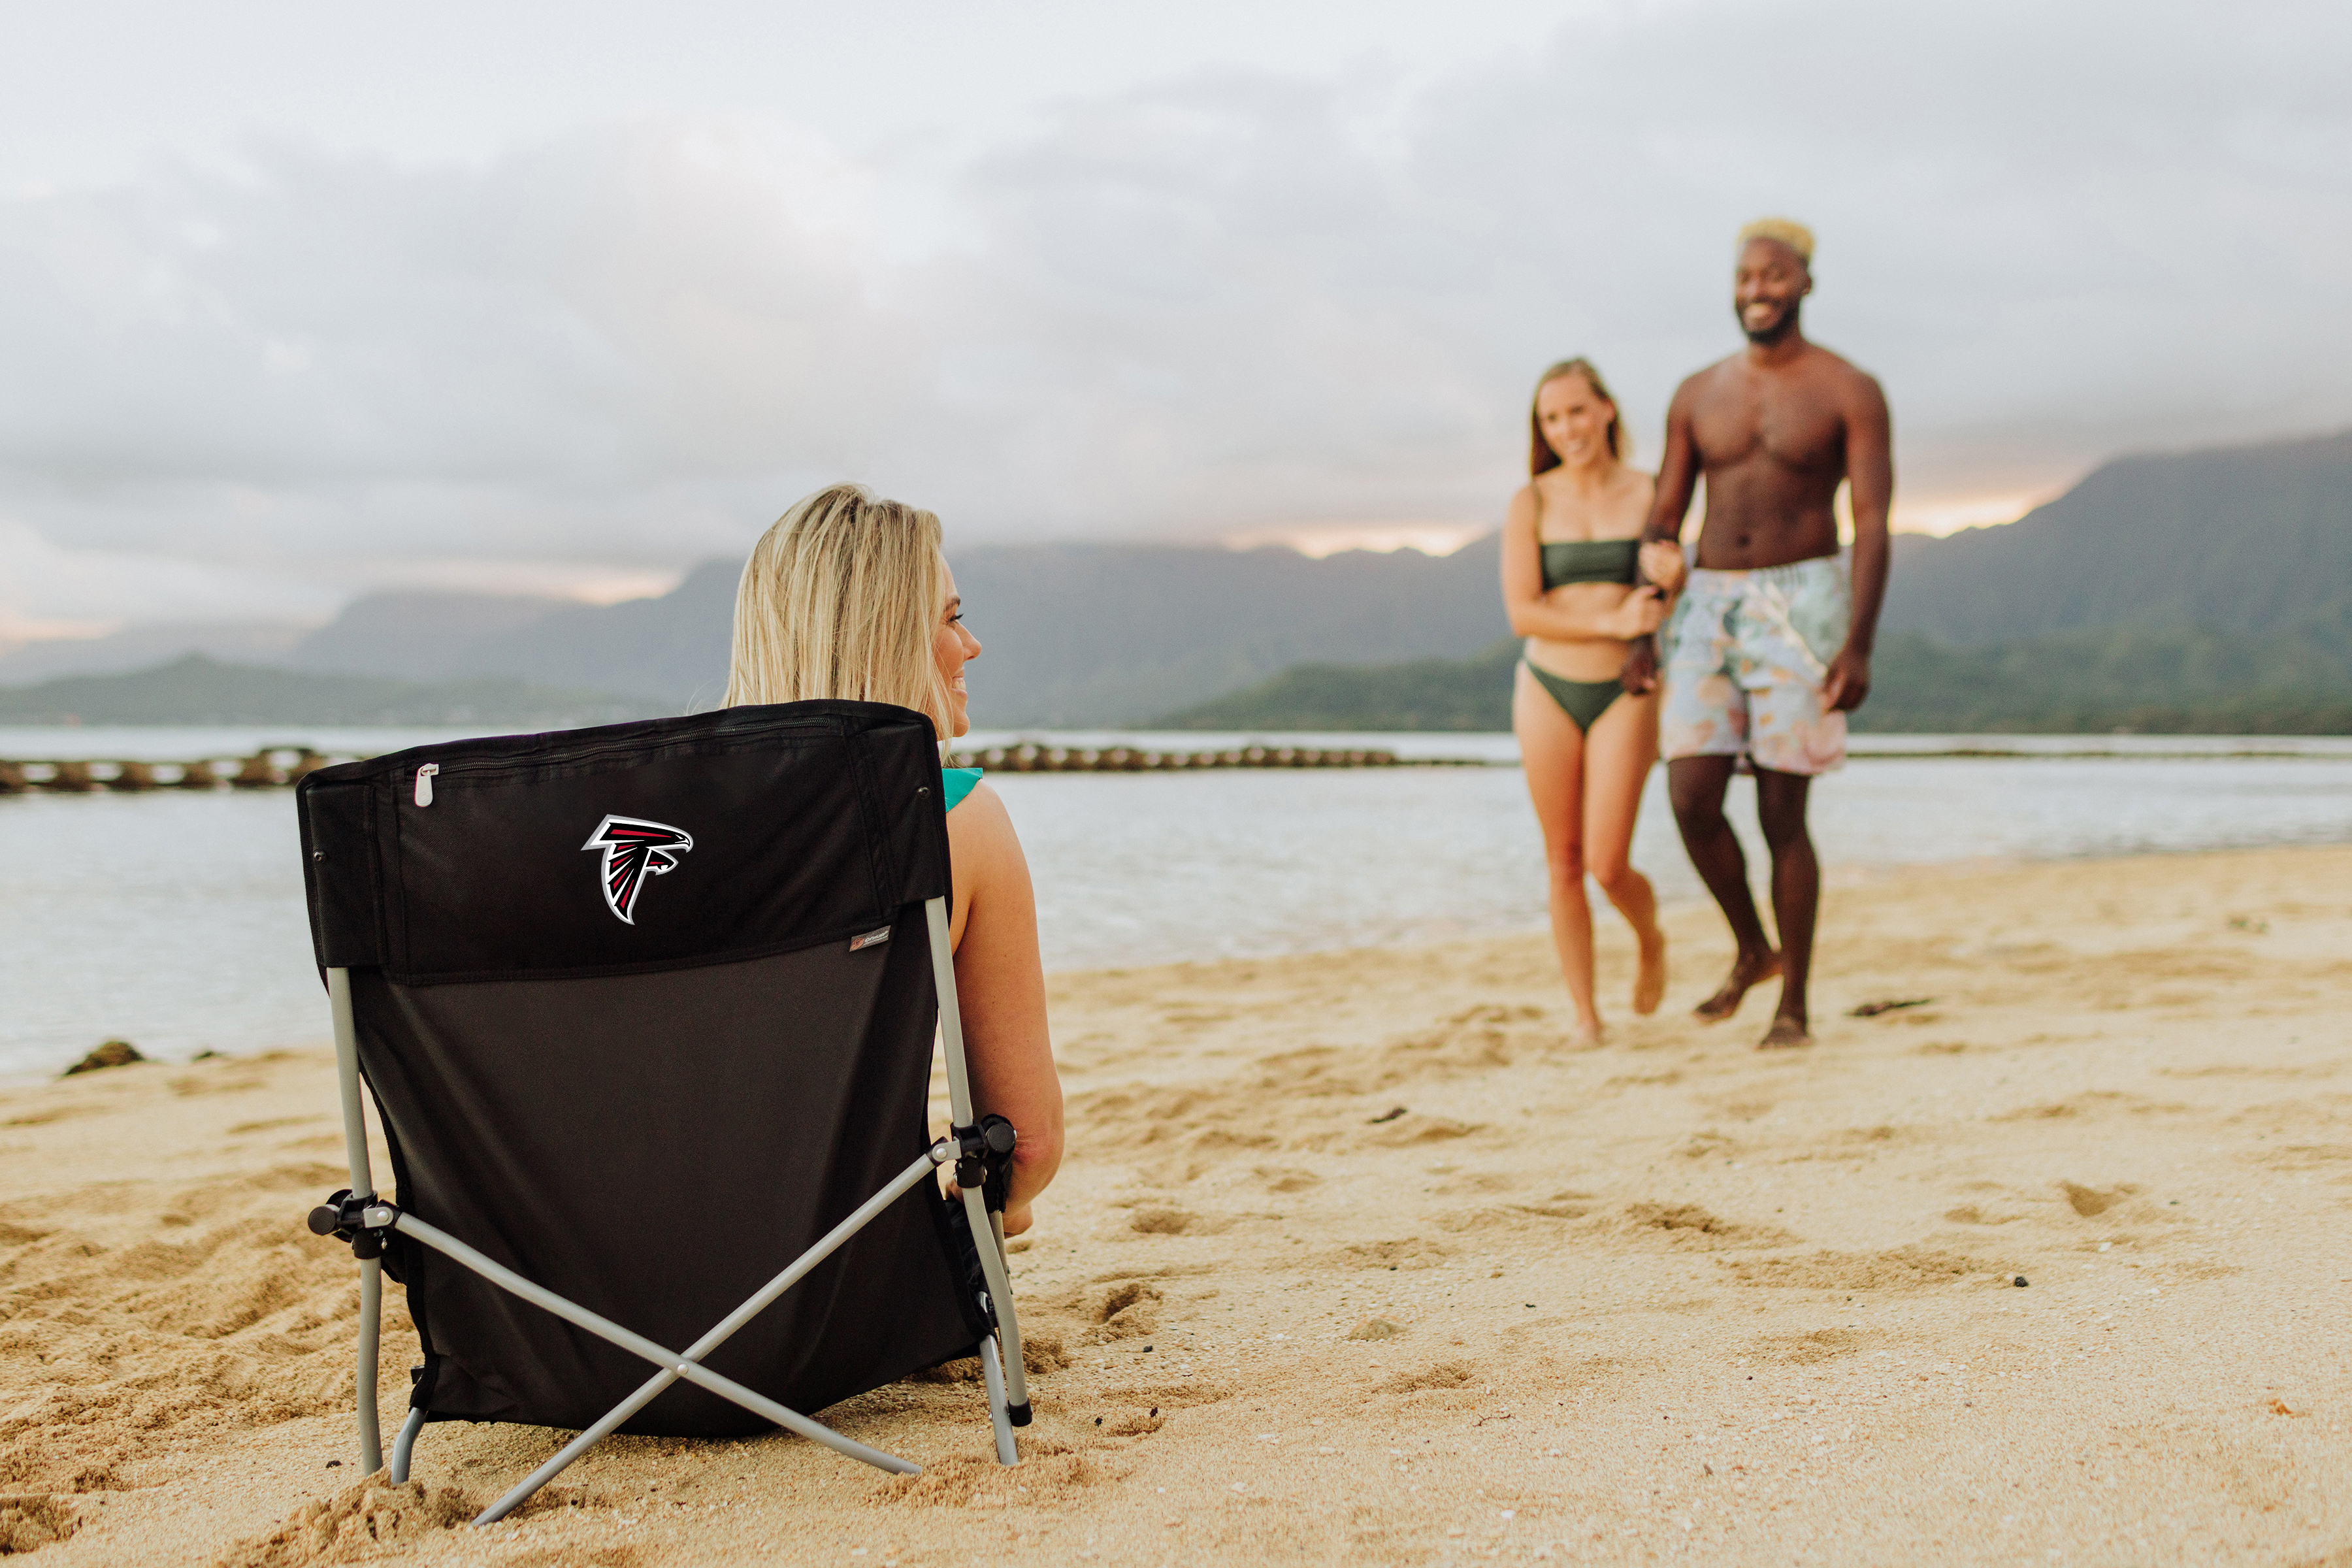 Atlanta Falcons - Tranquility Beach Chair with Carry Bag